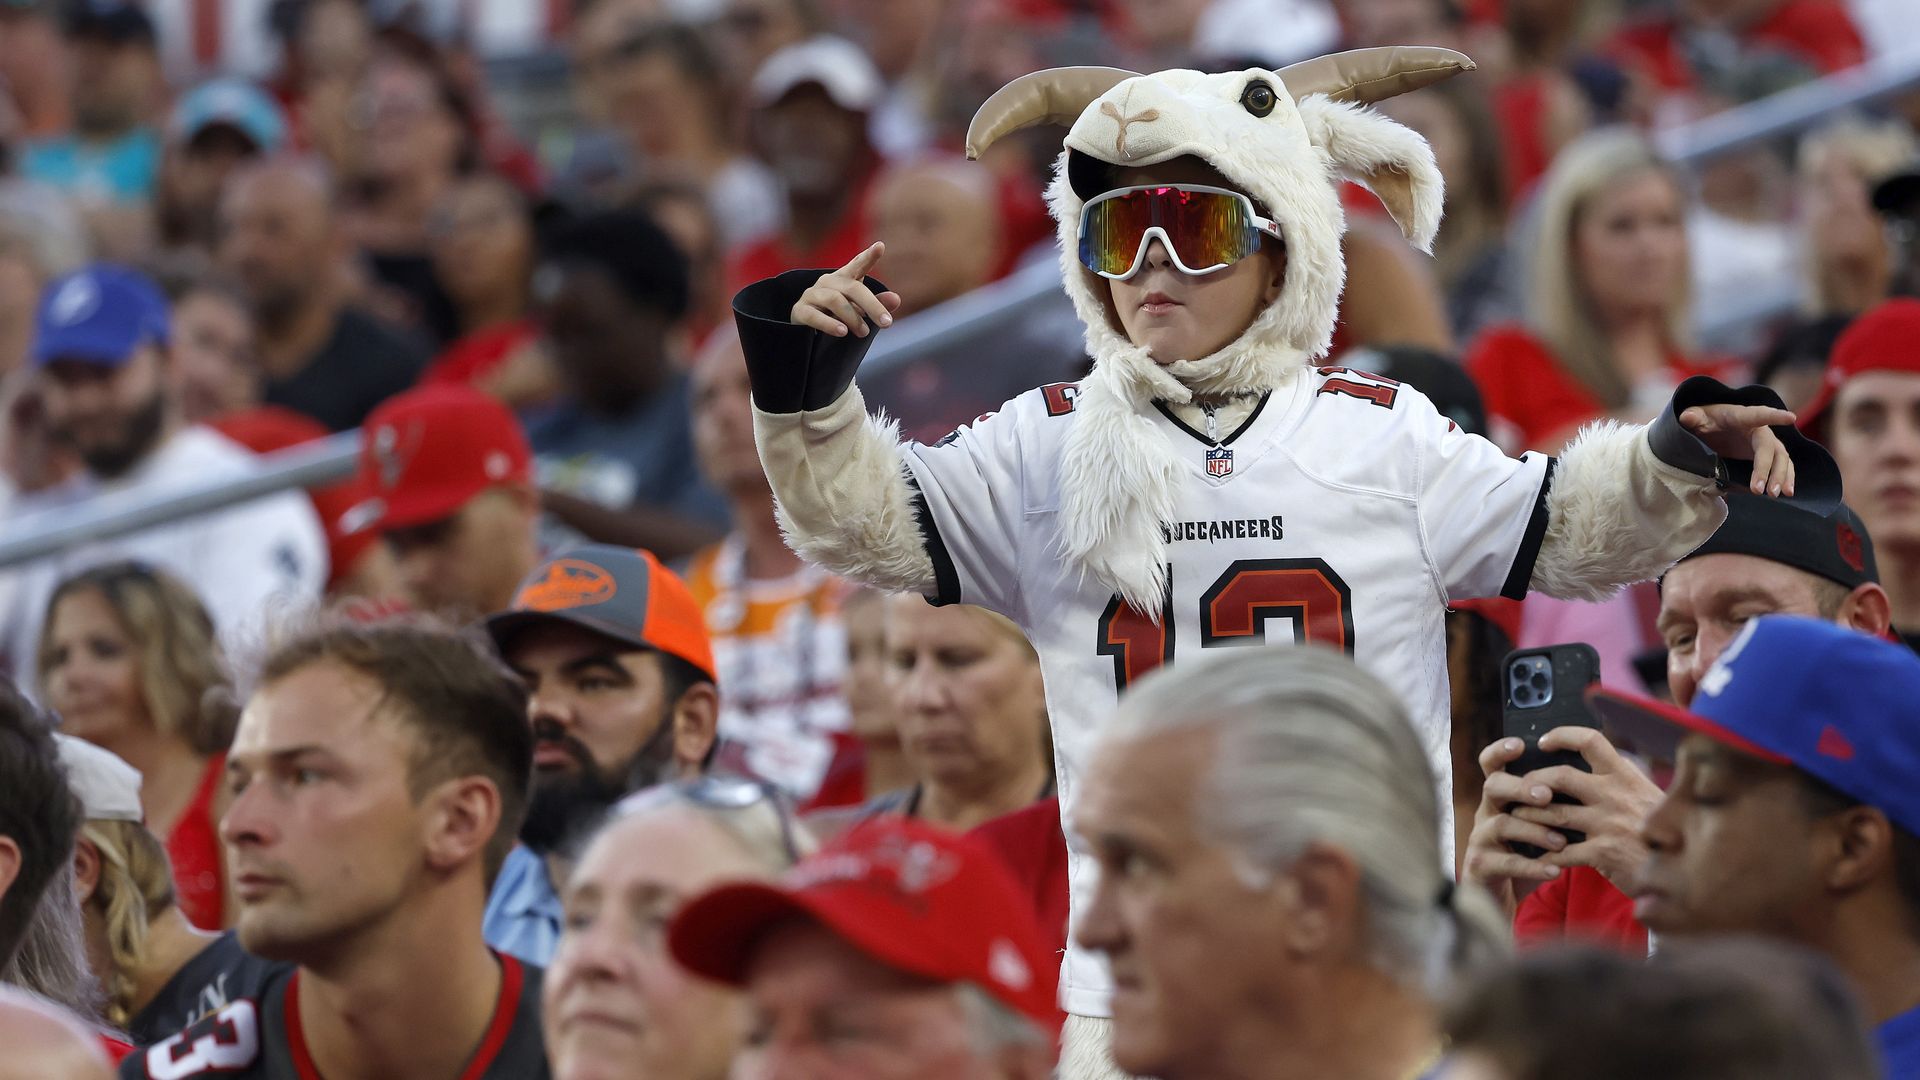 A Tampa Bay Buccaneers fan looks on during a preseason game against the Miami Dolphins at Raymond James Stadium